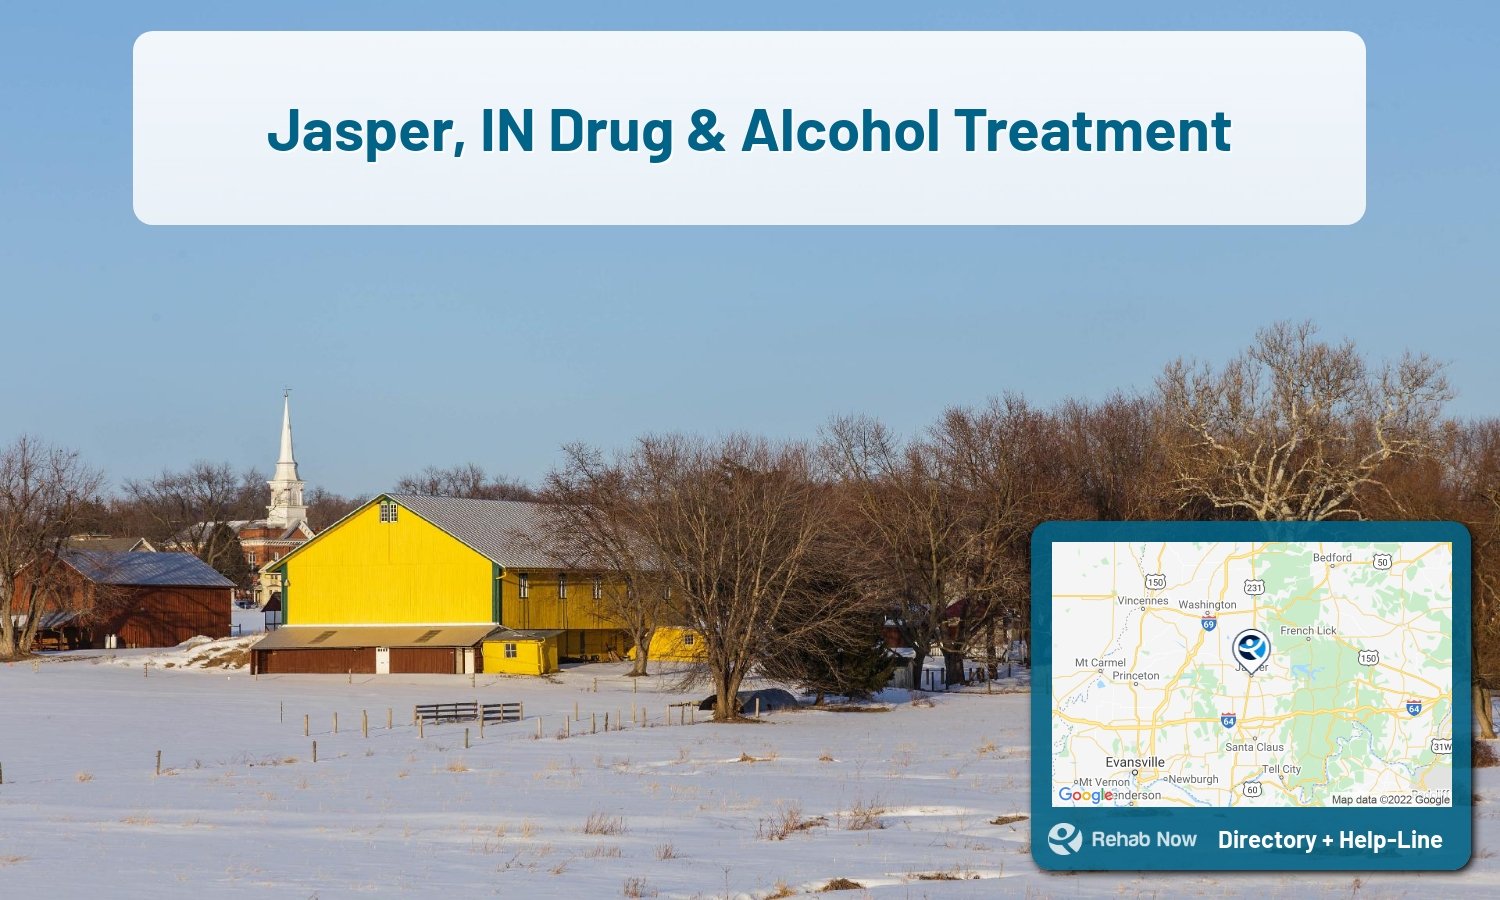 List of alcohol and drug treatment centers near you in Jasper, Indiana. Research certifications, programs, methods, pricing, and more.